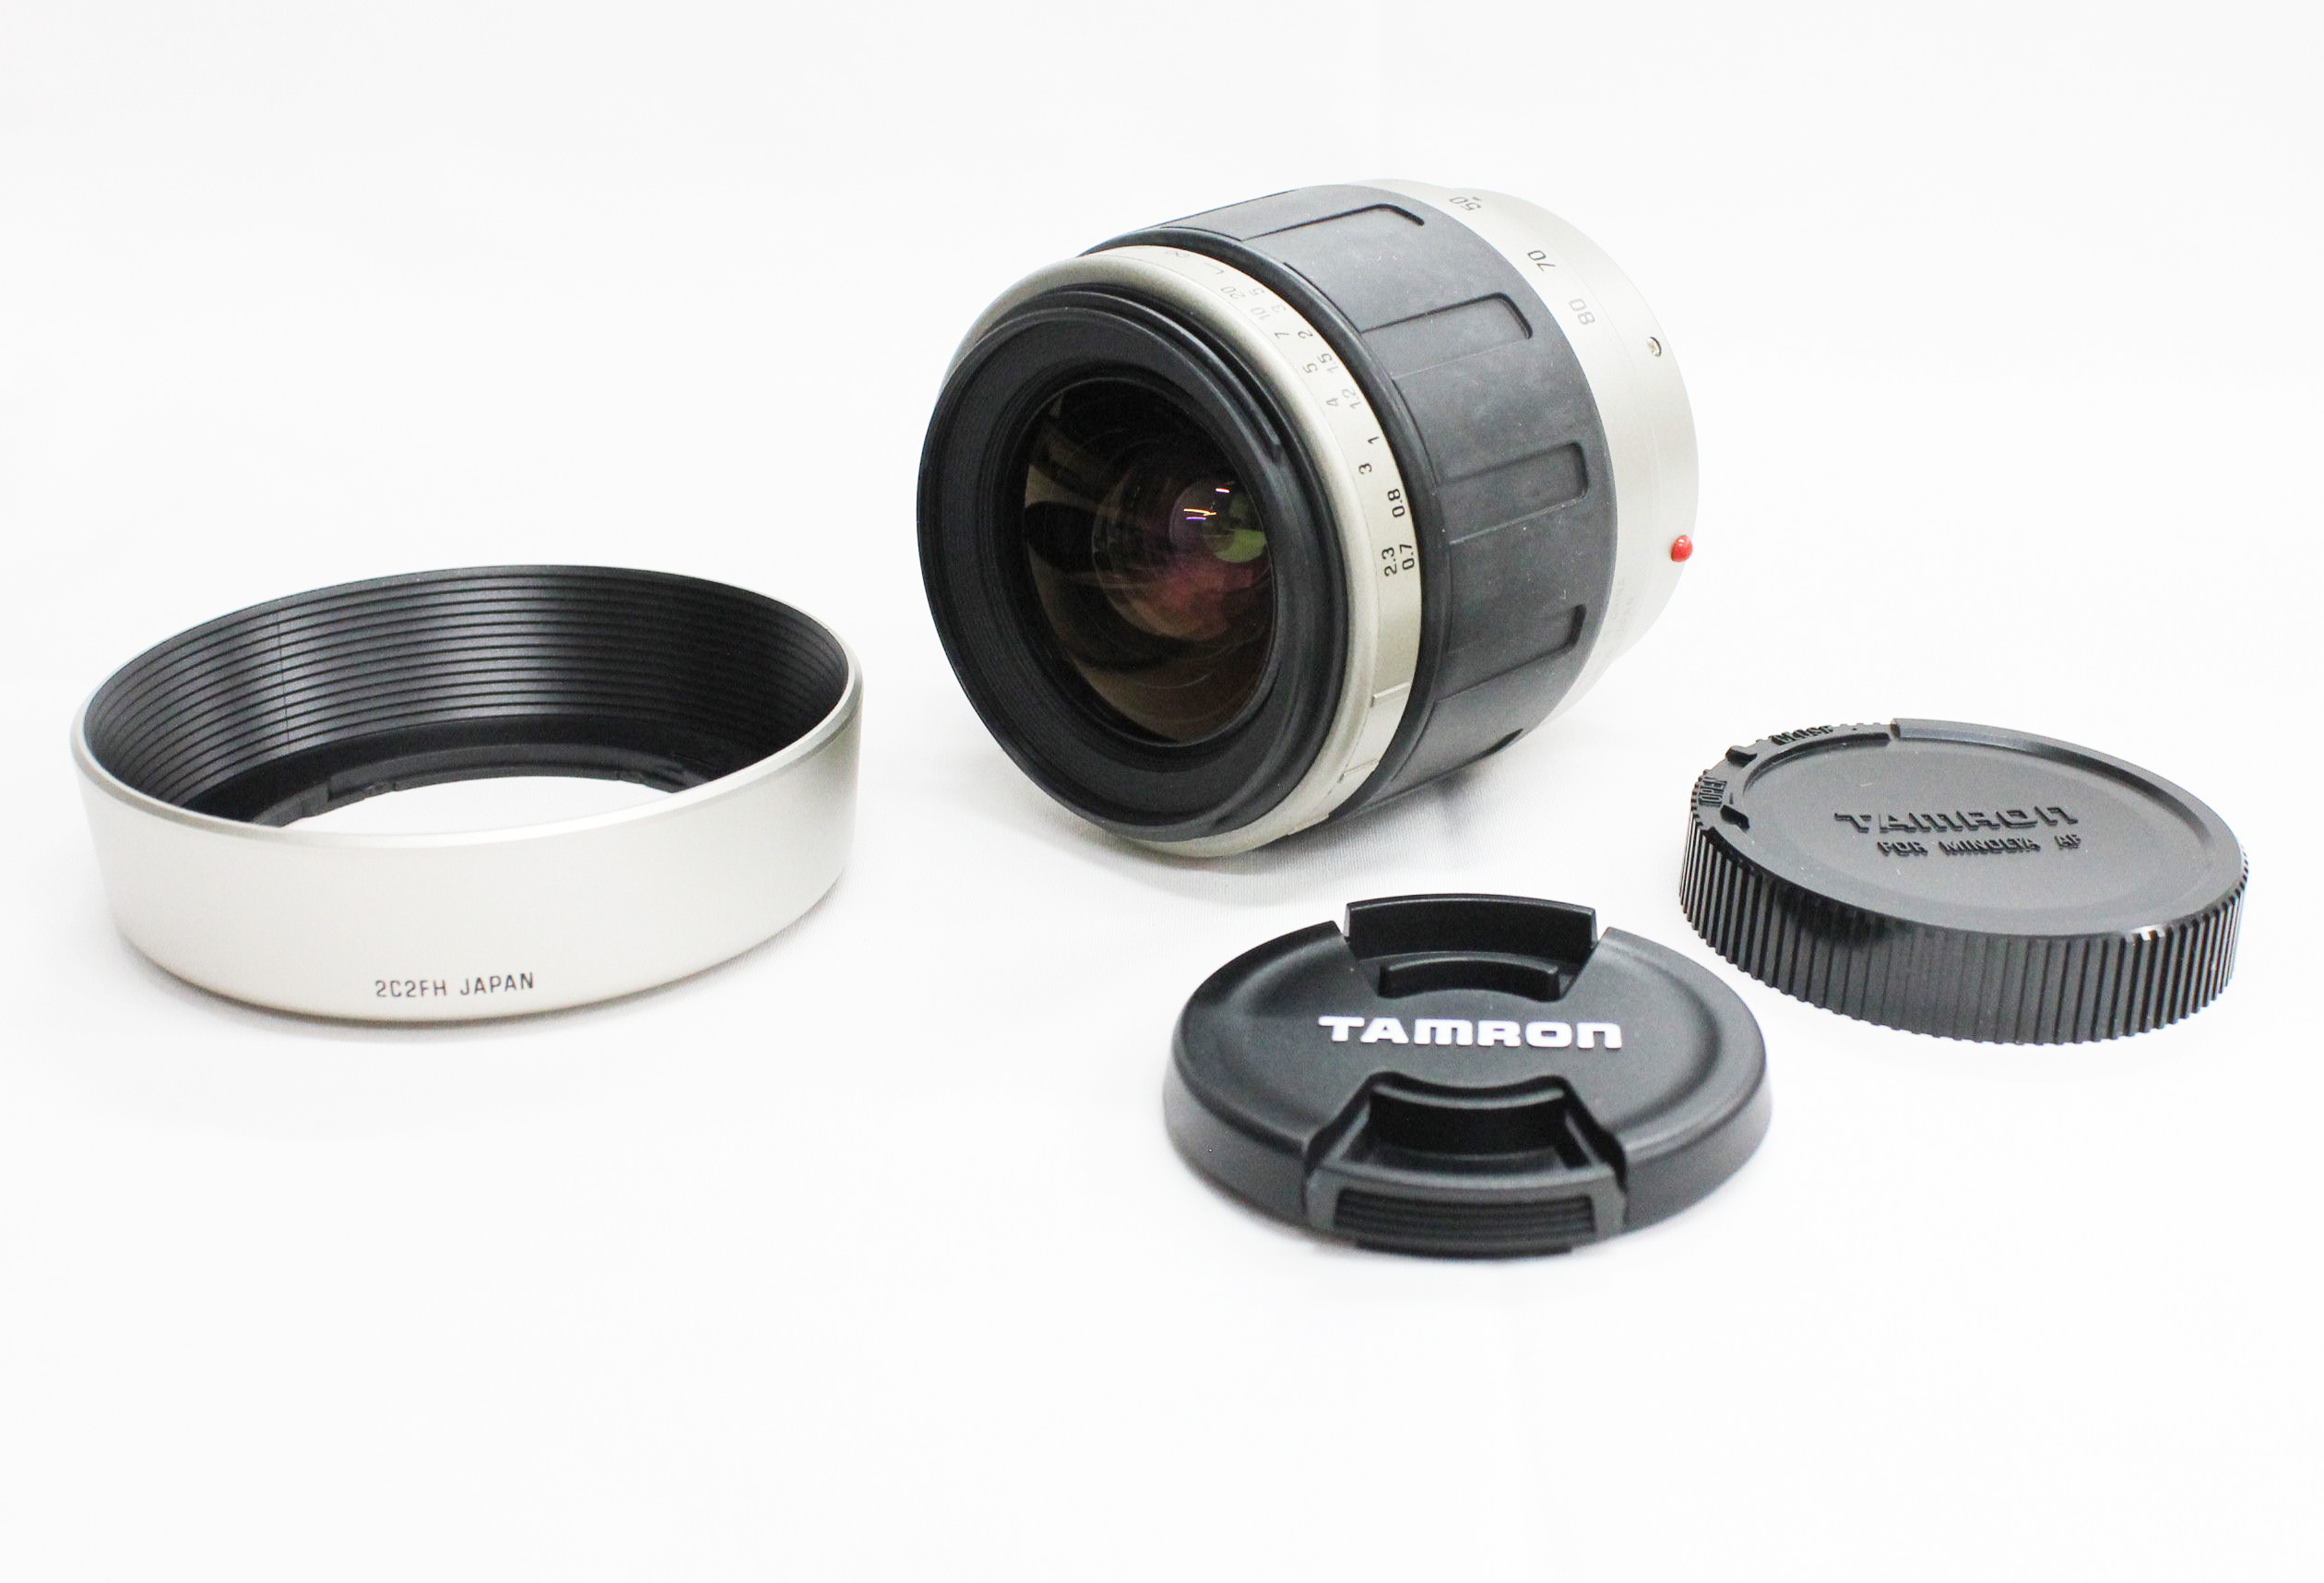 [Unused] Tamron AF 28-80mm F/3.5-5.6 Lens with Hood for Minolta/Sony A Mount from Japan